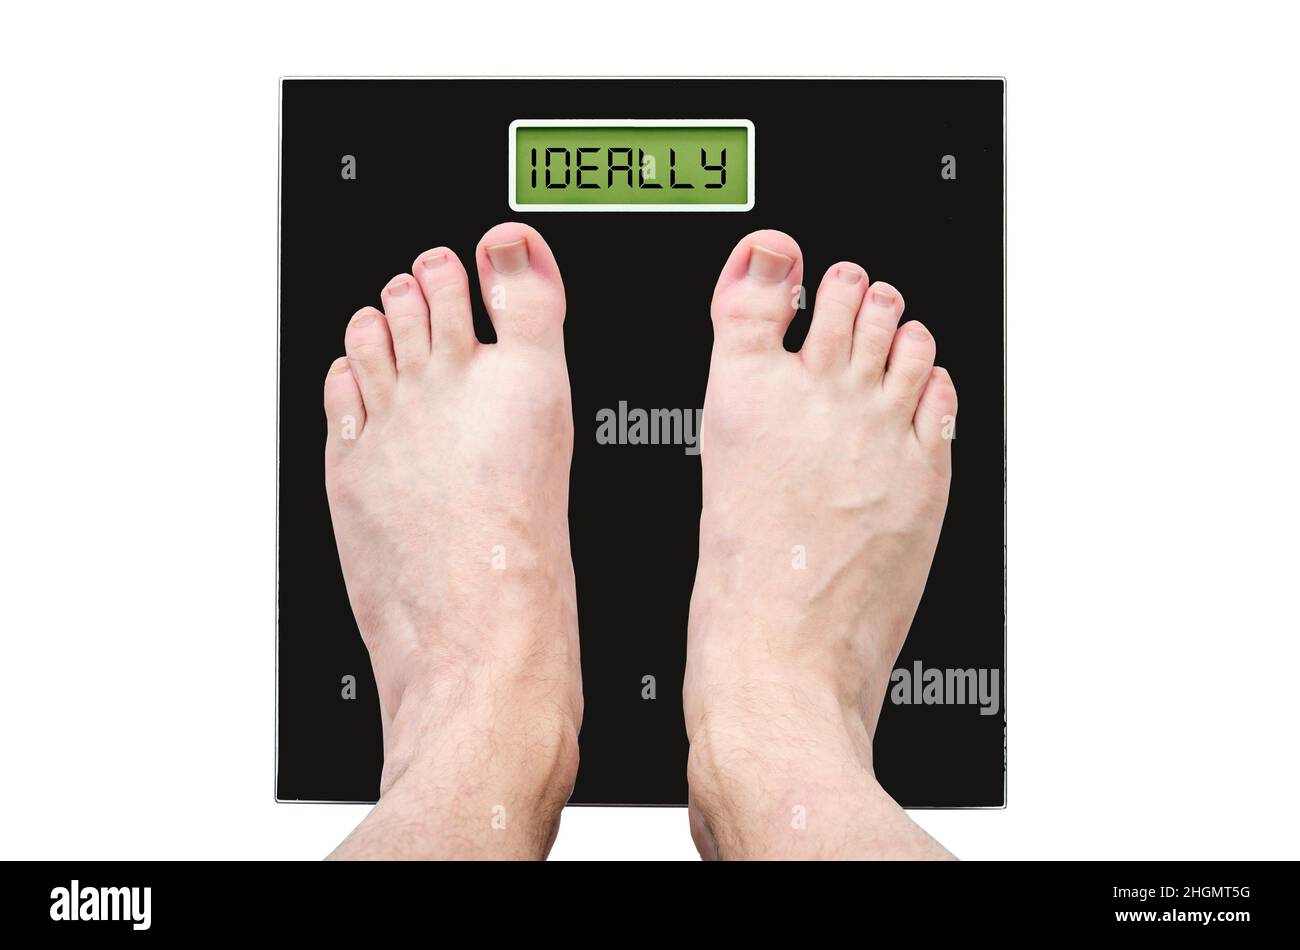 Man measuring body composition balance, holding handles of a medical scales  during Inbody test Stock Photo - Alamy